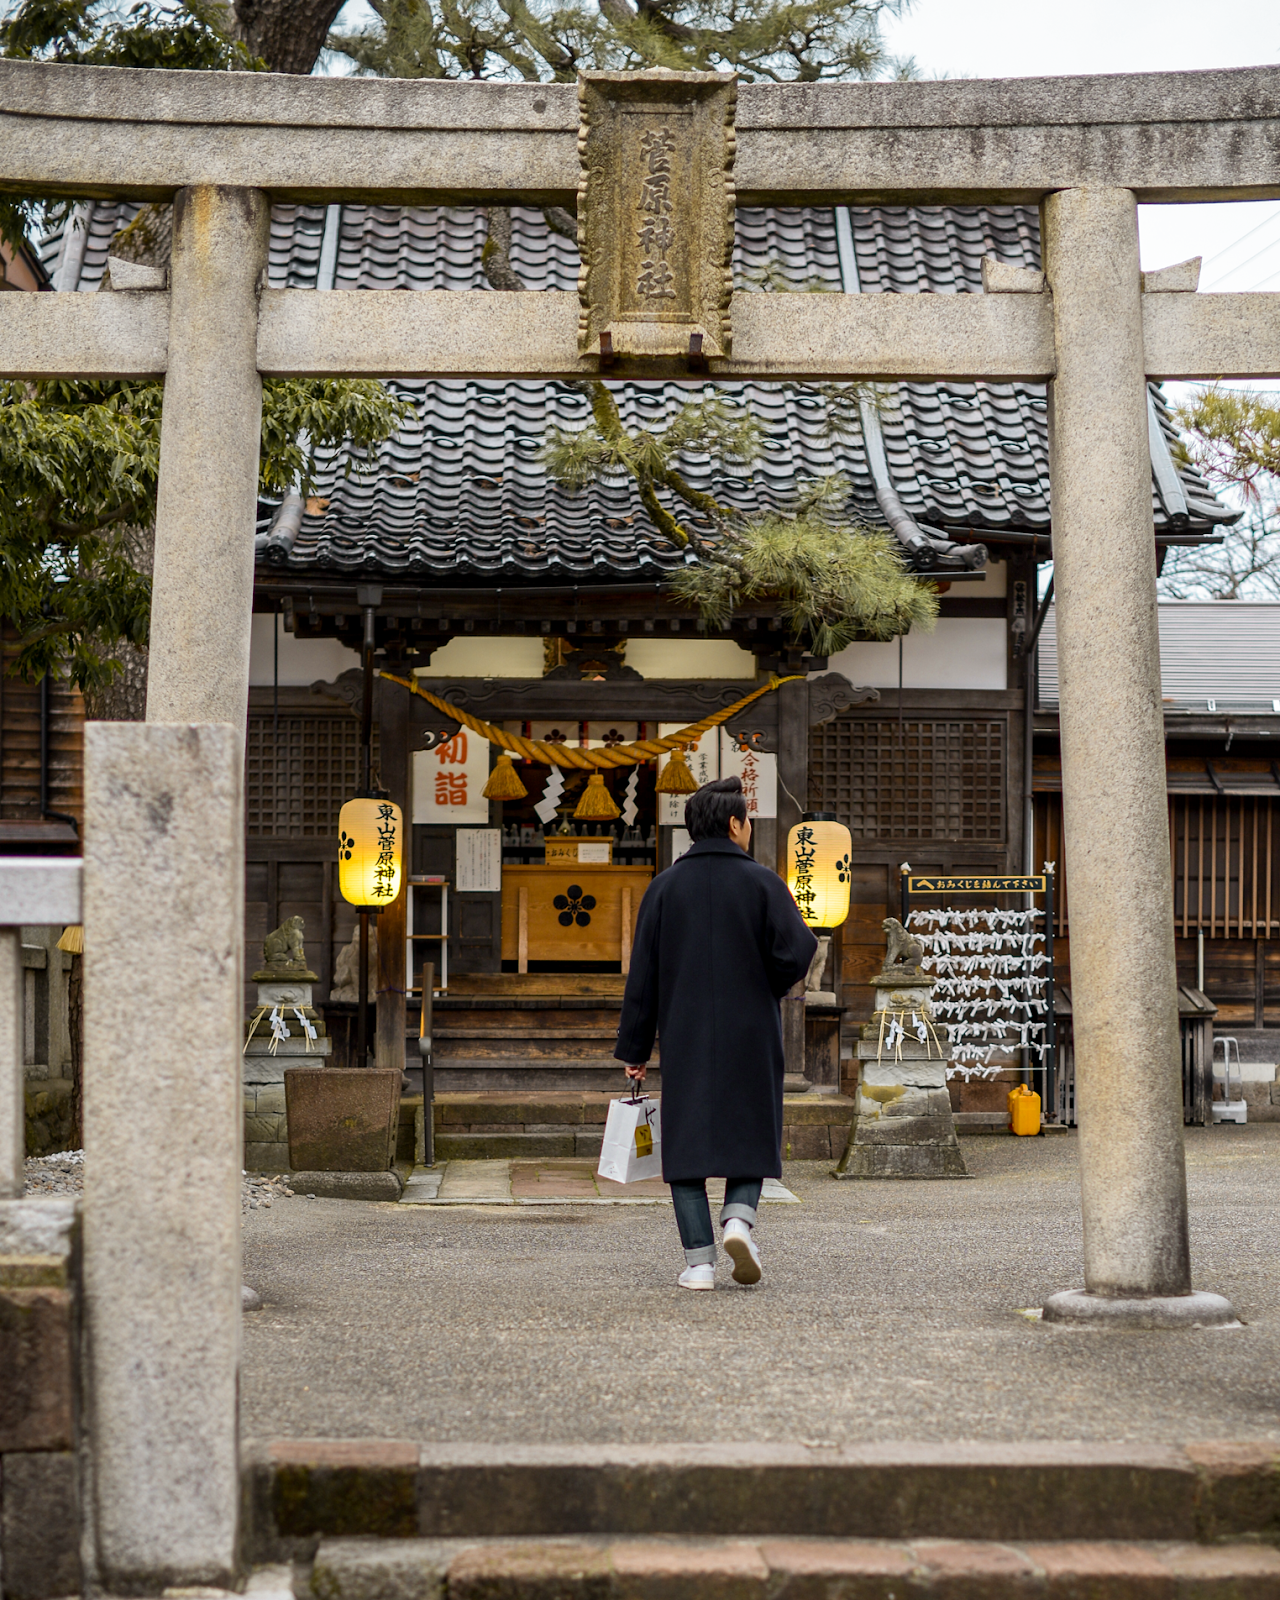 Sugawara Shrine, Kanazawa trip from Tokyo, must-visit cities in Japan, Nishi Chaya District, photogenic and charming towns in Japan - FOREVERVANNY